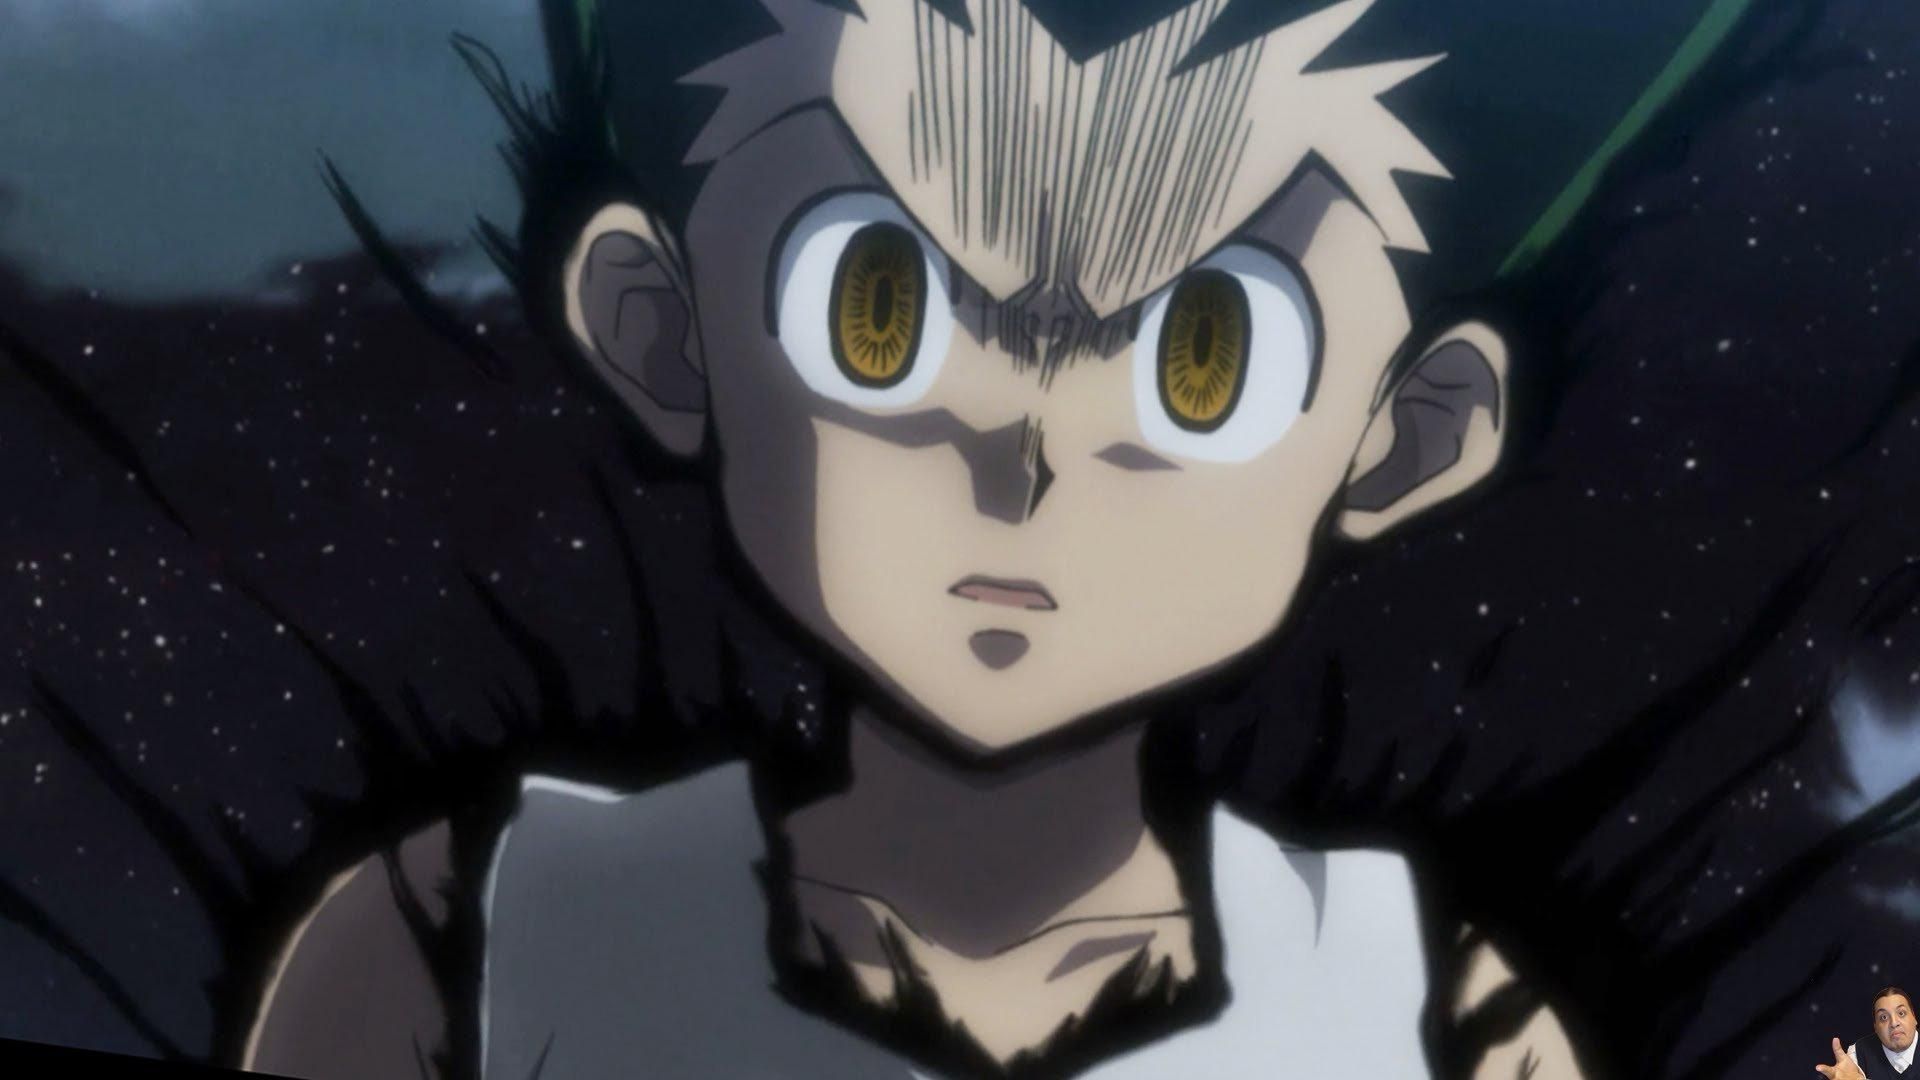 Gon Freecs Transformation Wallpaper image in Collection Page